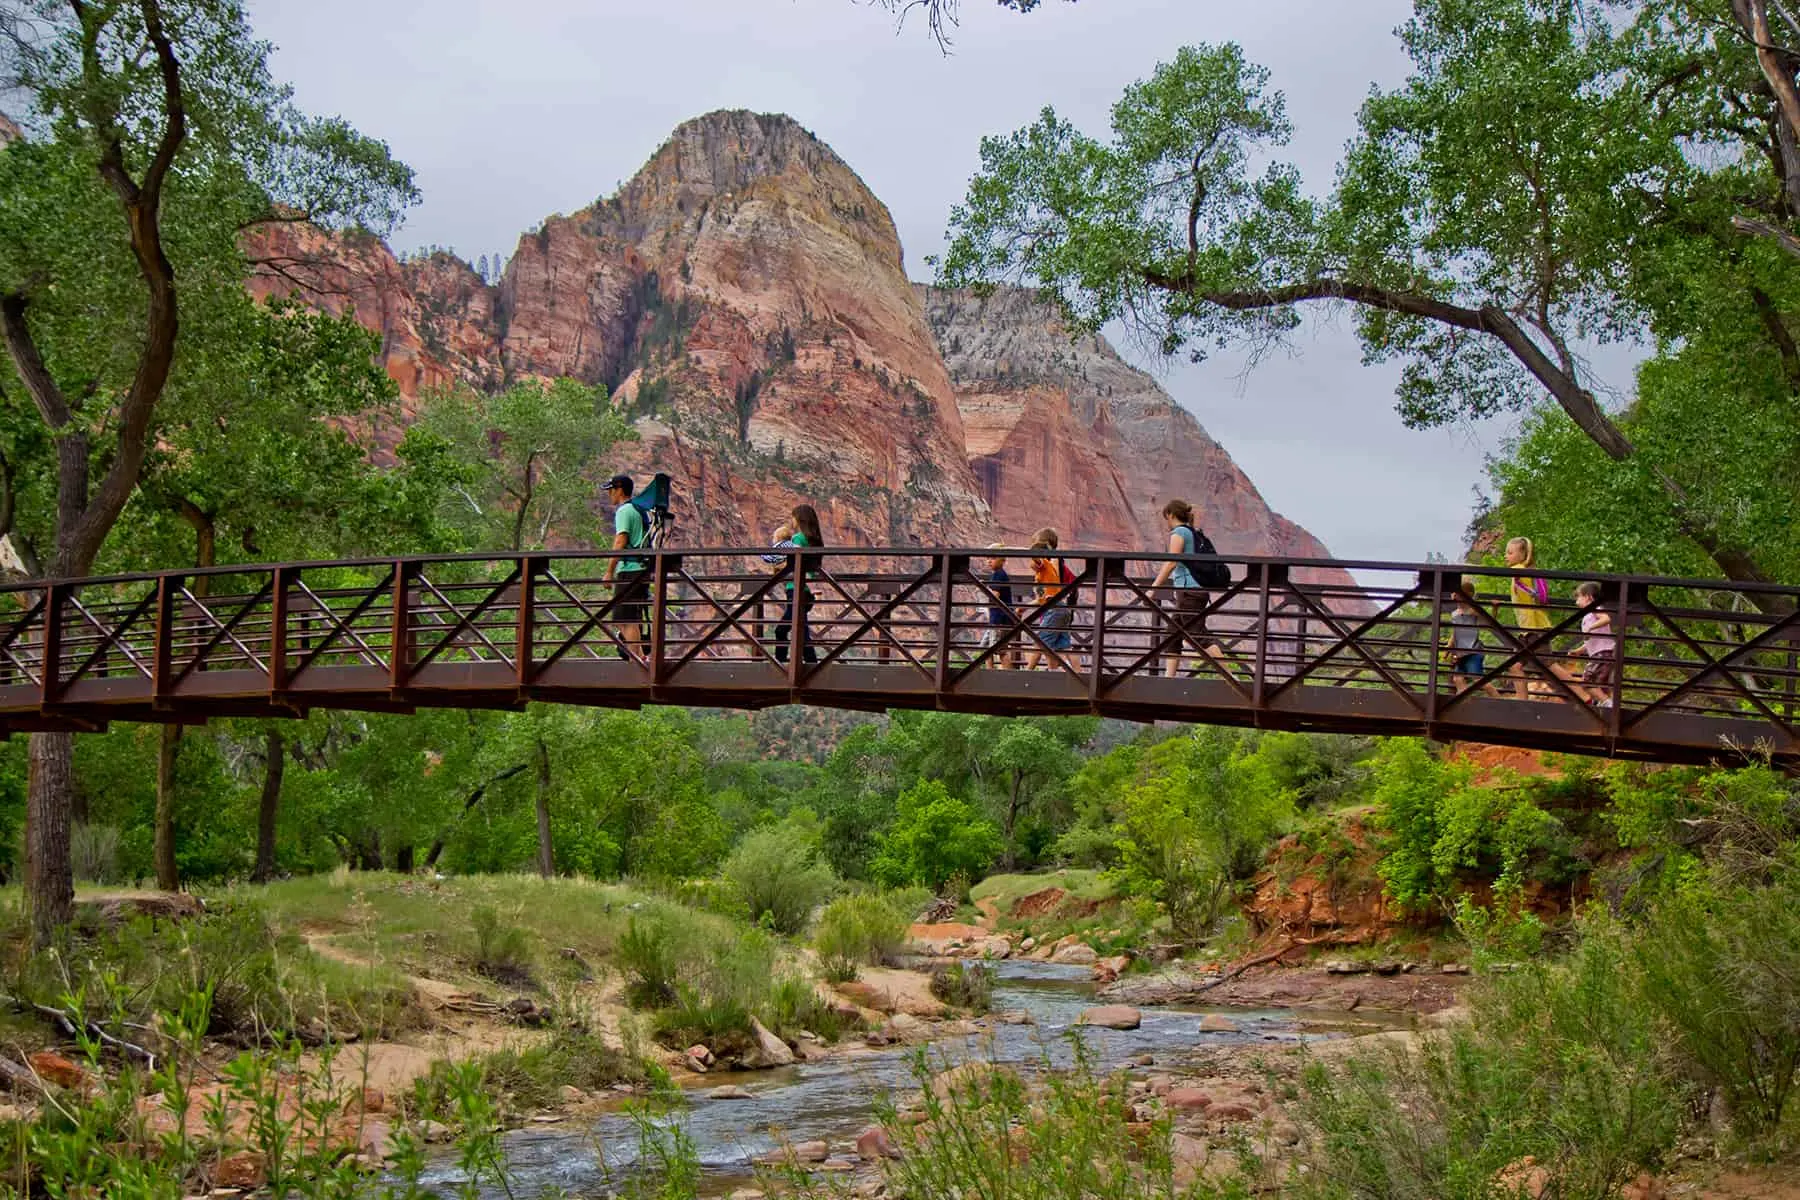 Zion Bridge over the Virgin River in Zion National Park Photo Courtesy of Greater Zion Convention & Tourism Office